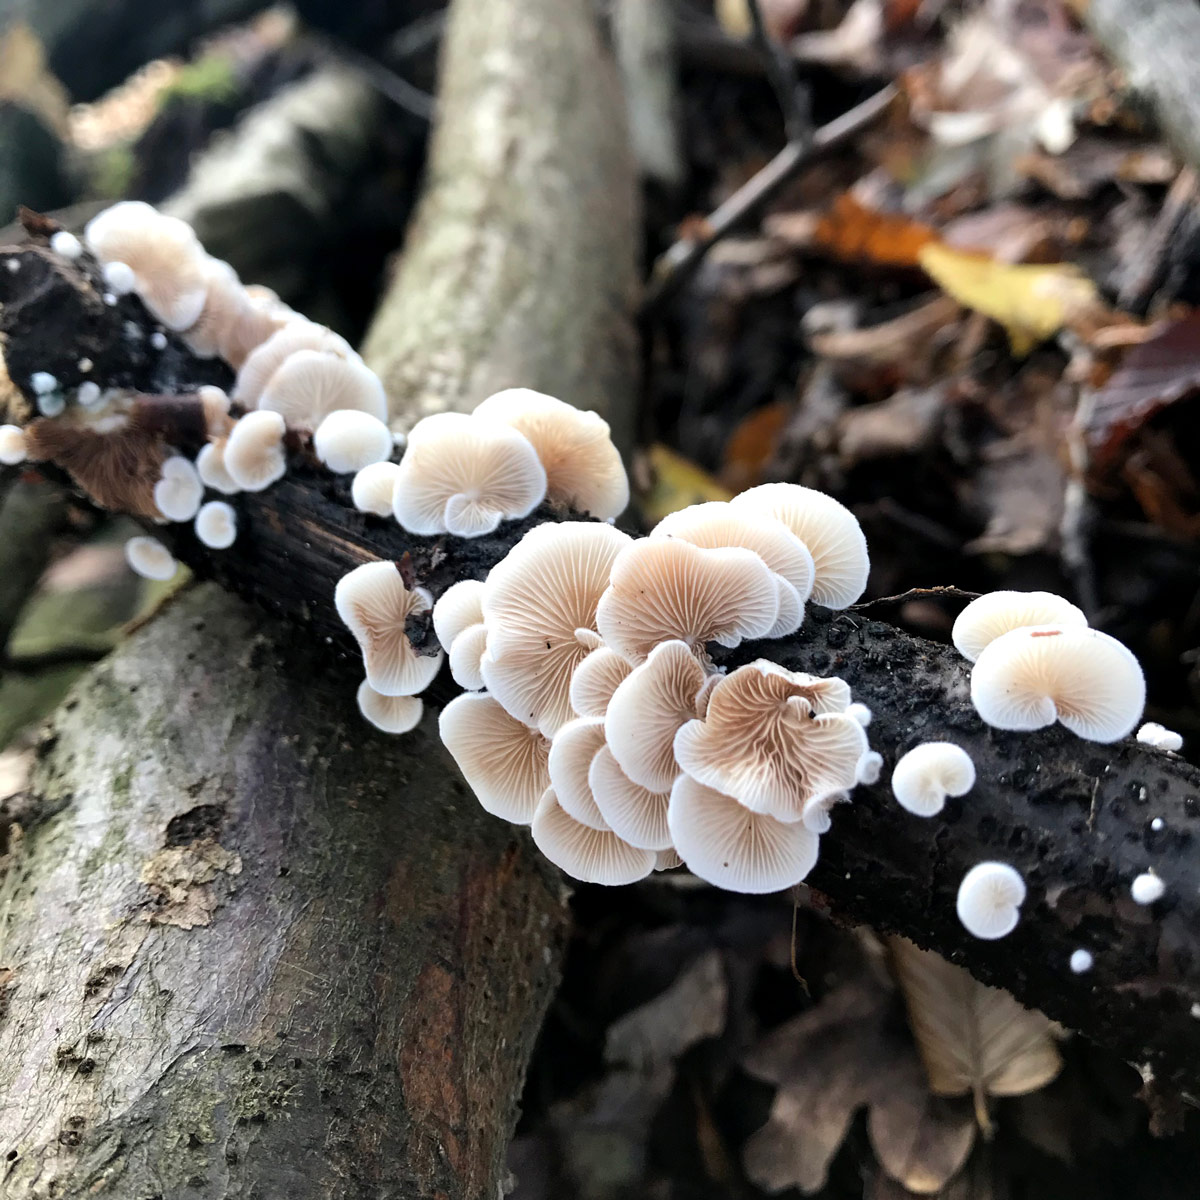 A close-up of white fungi growing on a log